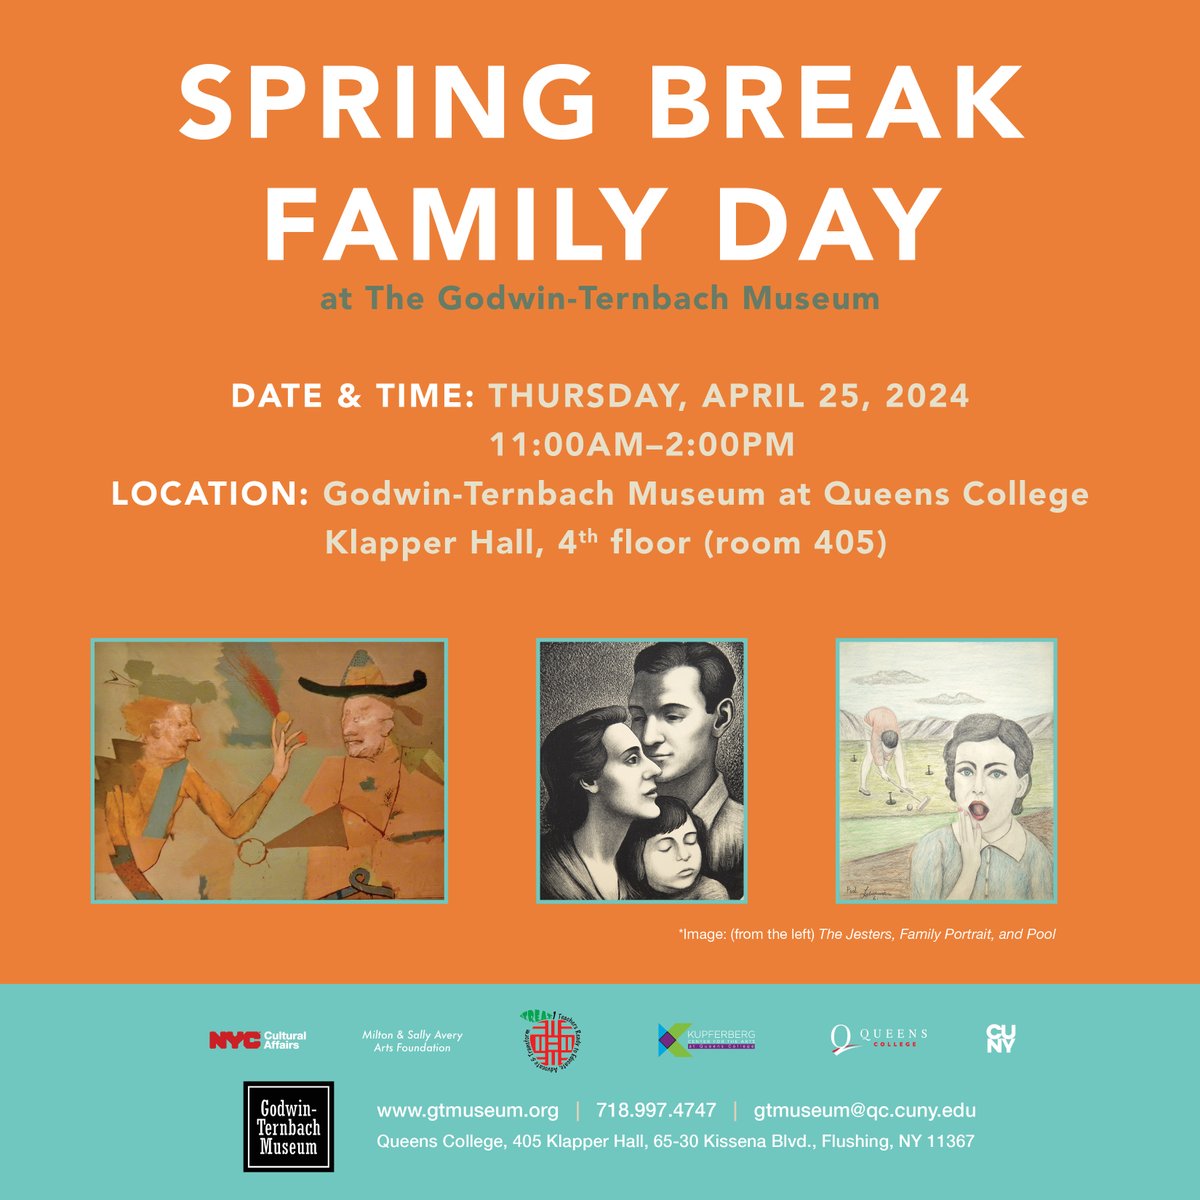 Join us for SPRING BREAK FAMILY DAY! THURSDAY, April 25, 2024, 11:00Am–2:00pm Godwin-Ternbach Museum at Queens College Klapper Hall, 4th floor (room 405) Families and kids of all ages are welcome to drop in to view our current exhibition. This program is FREE & open to public.